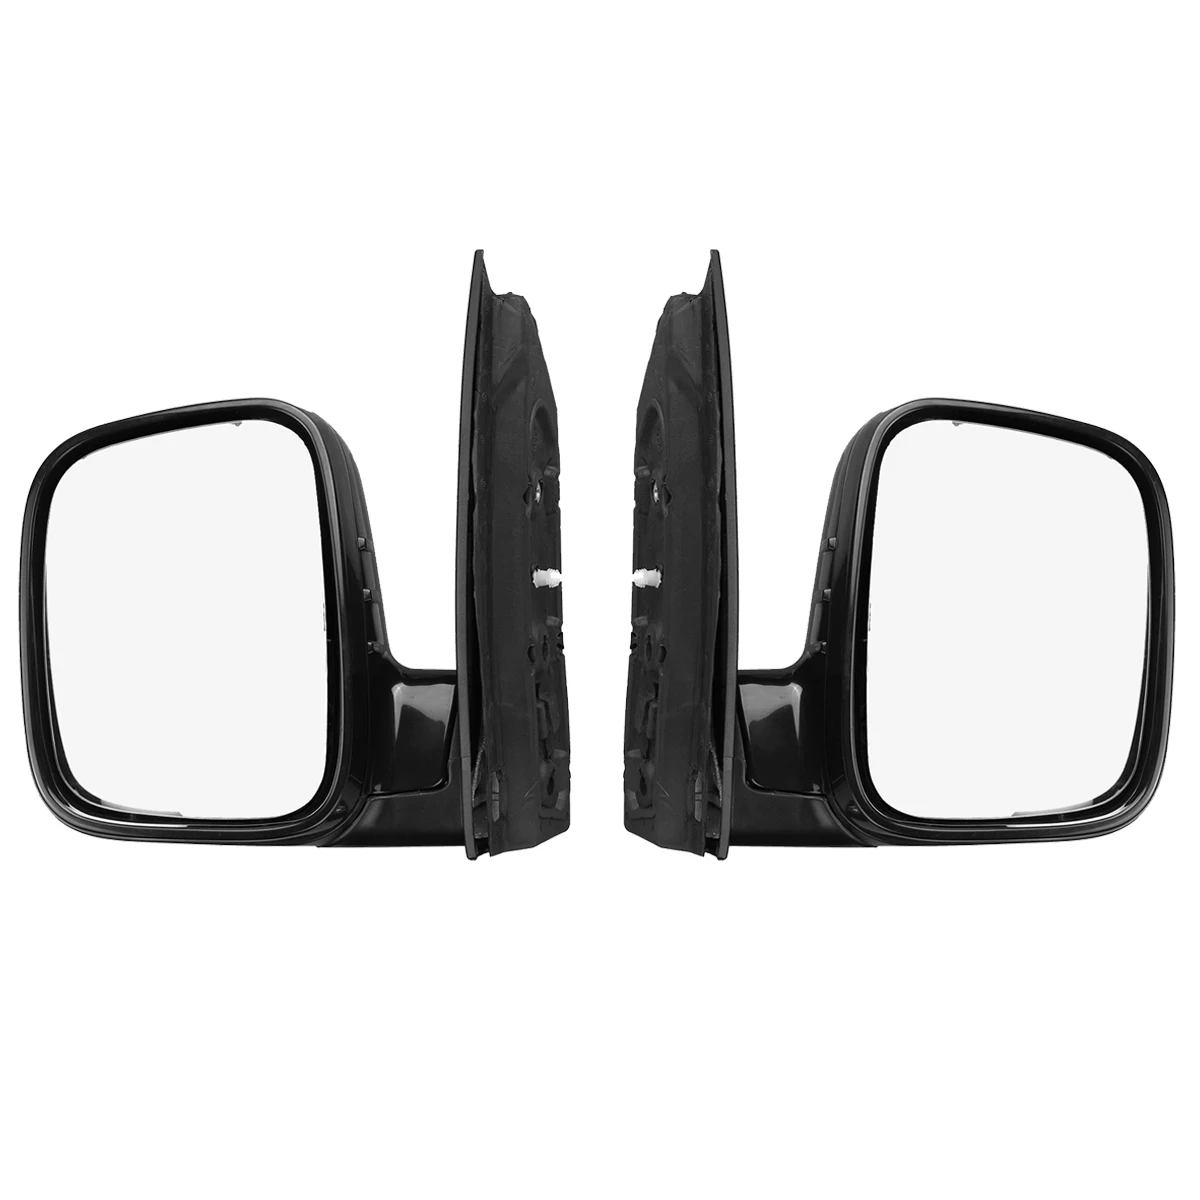 Left Passenger Convex Wing Mirror Glass for VW Caddy 2004-2015 RHD 49LS 